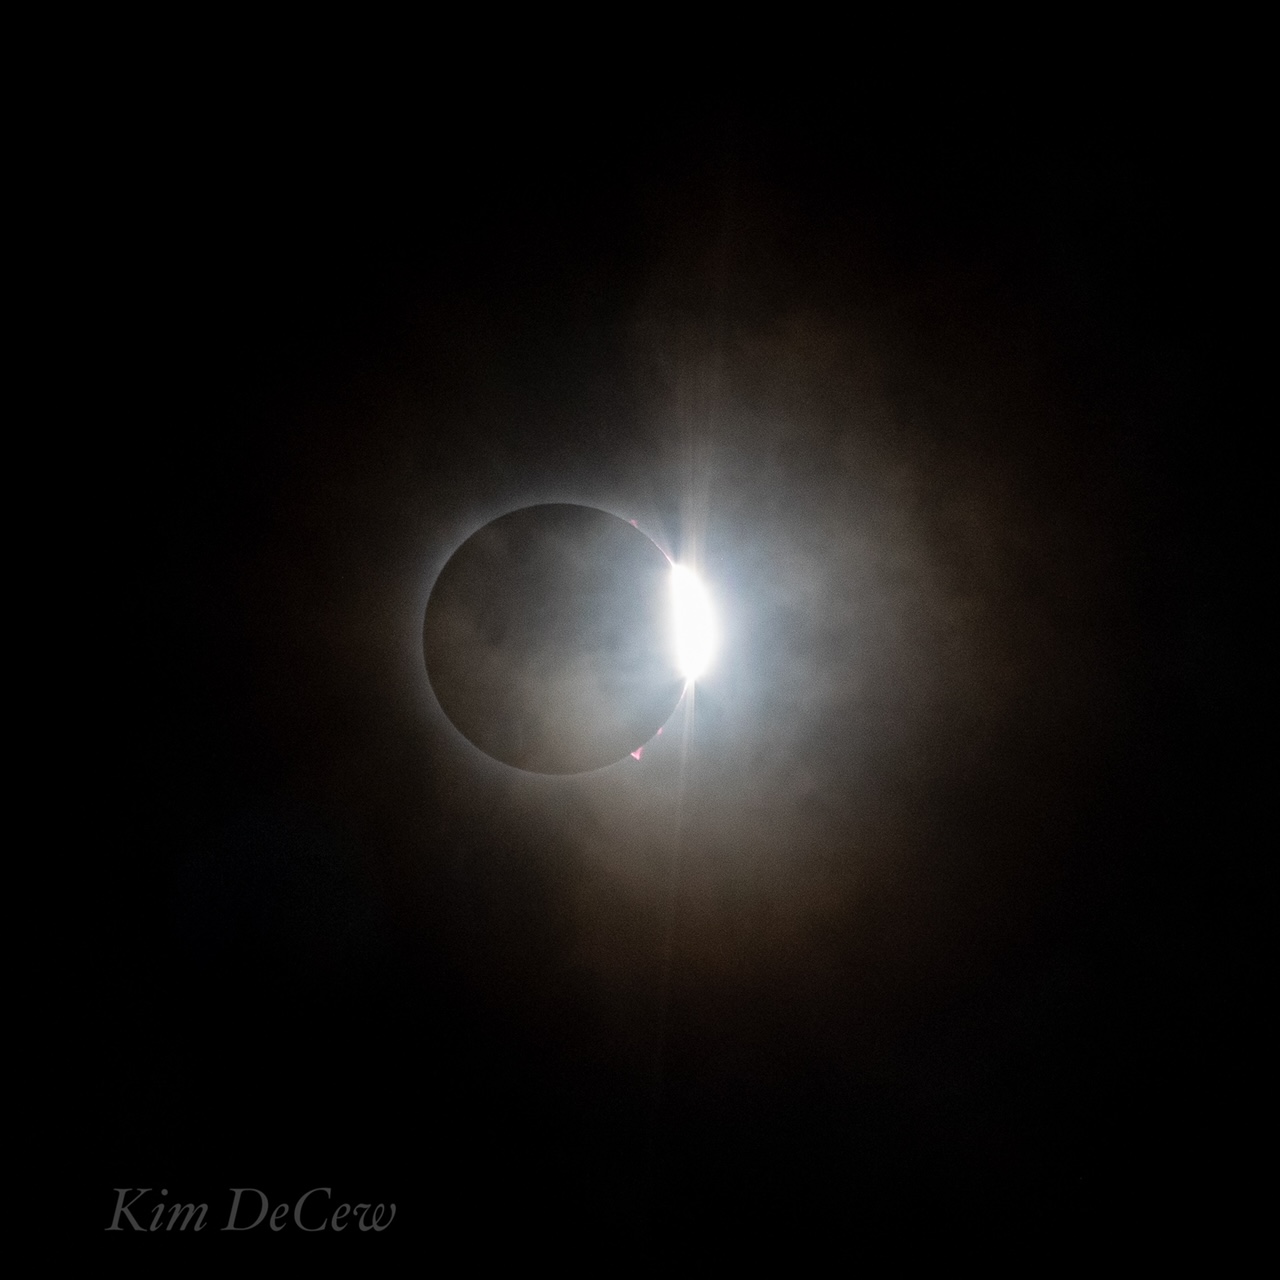 The diamond ring of the total solar eclipse seen from Hico, Texas by Kim DeCew